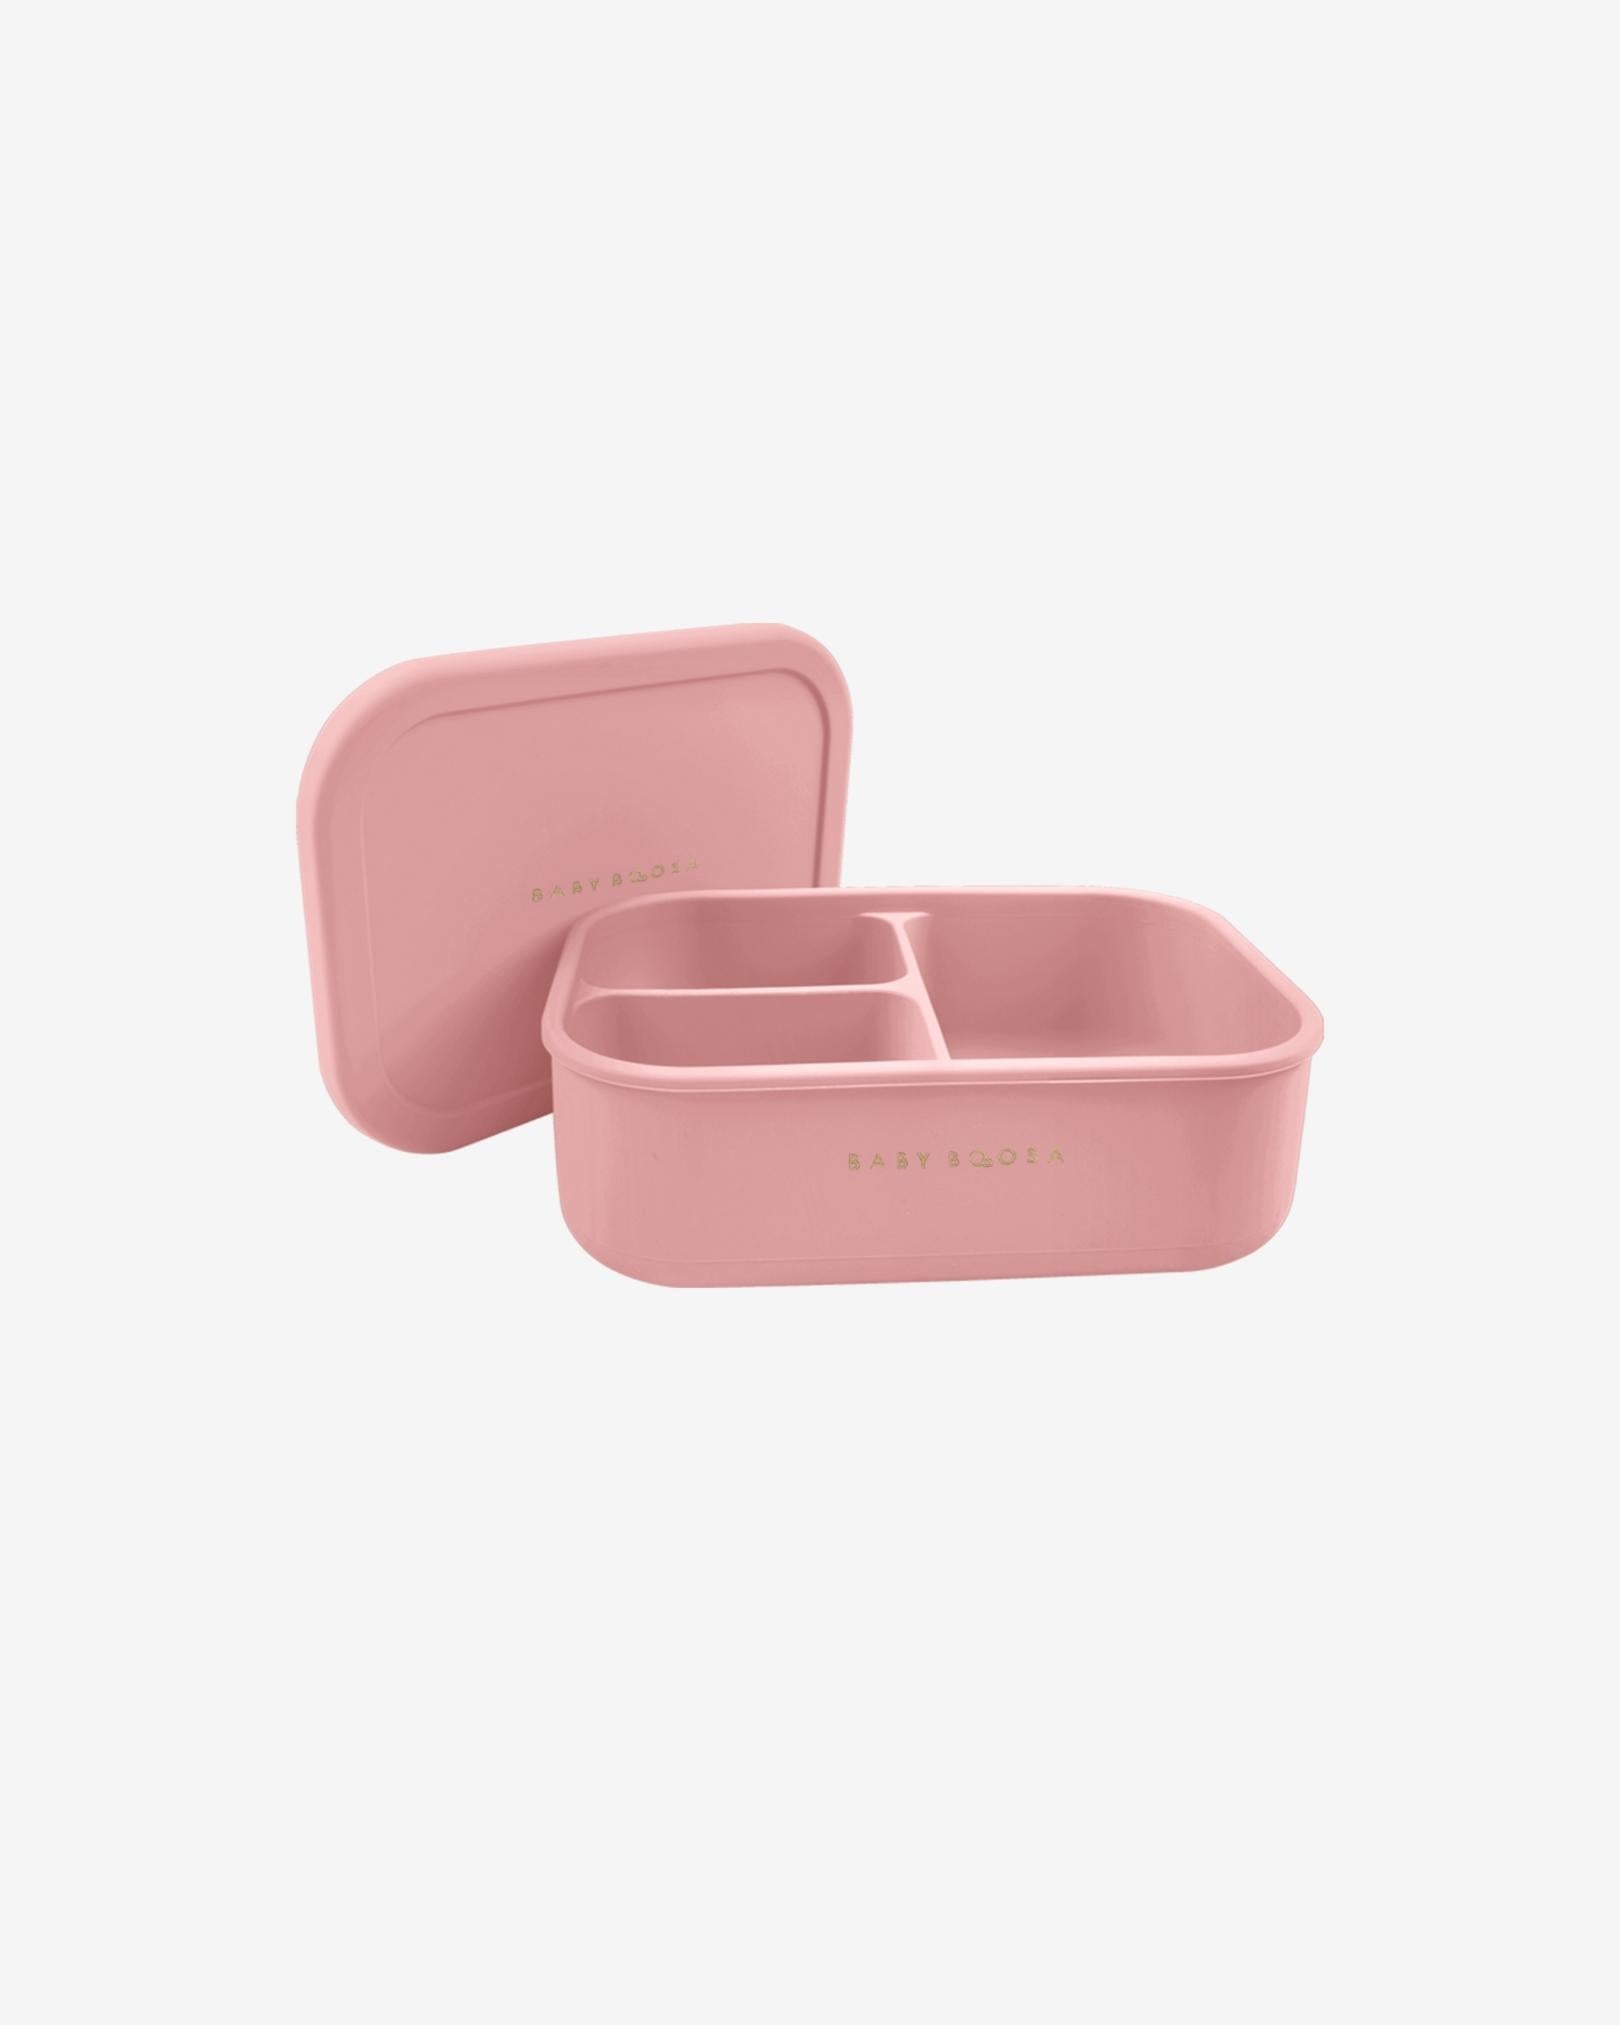 Silicone BrunchieBox™ | Meal Prep | On-the-go (Dusky Rose)